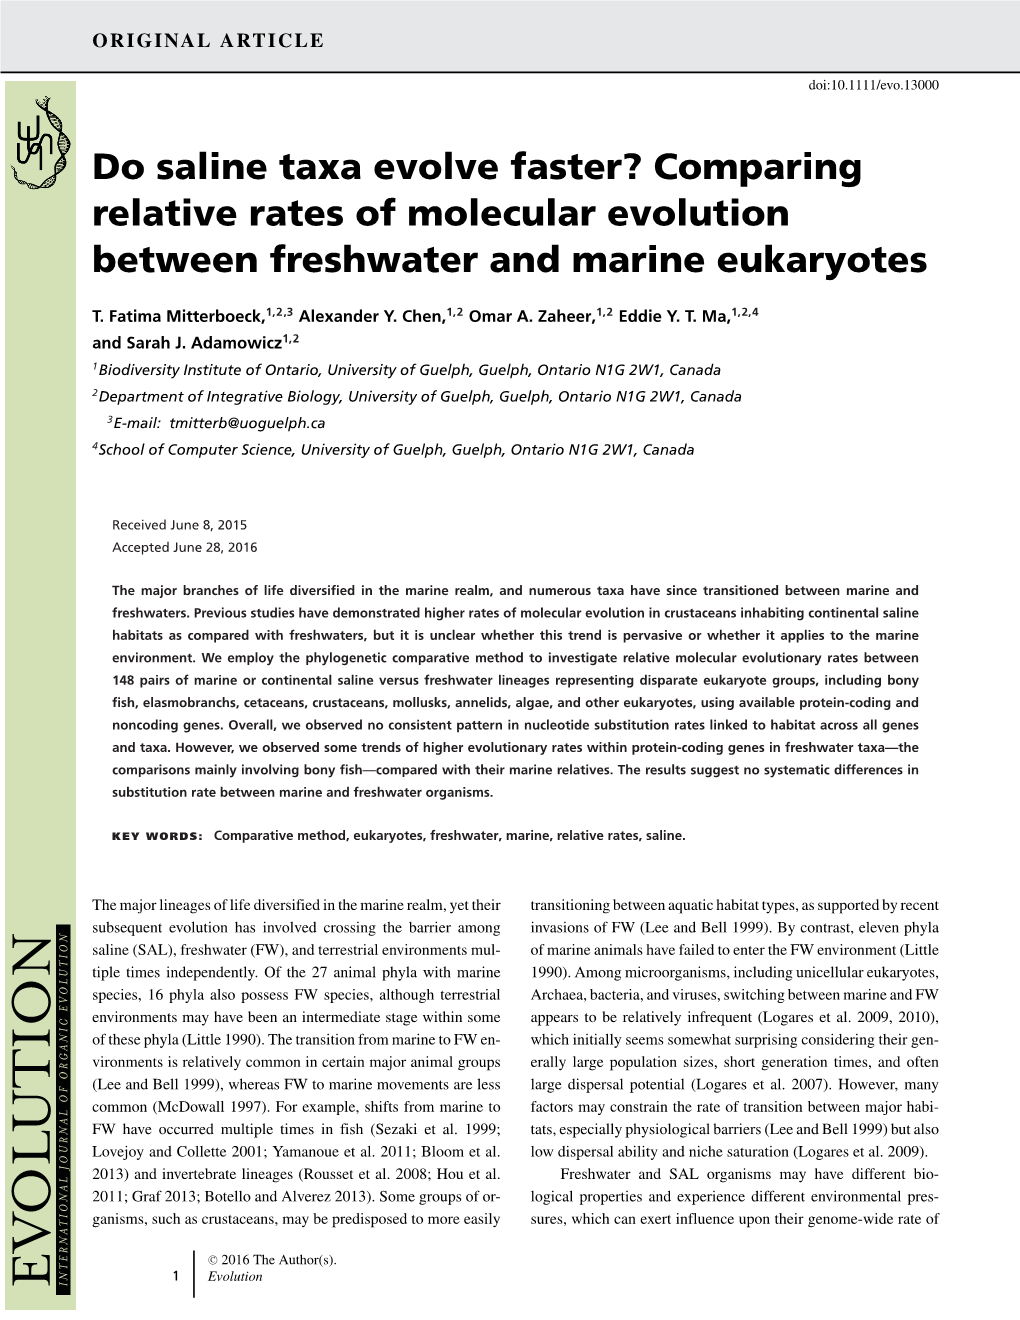 Comparing Relative Rates of Molecular Evolution Between Freshwater and Marine Eukaryotes